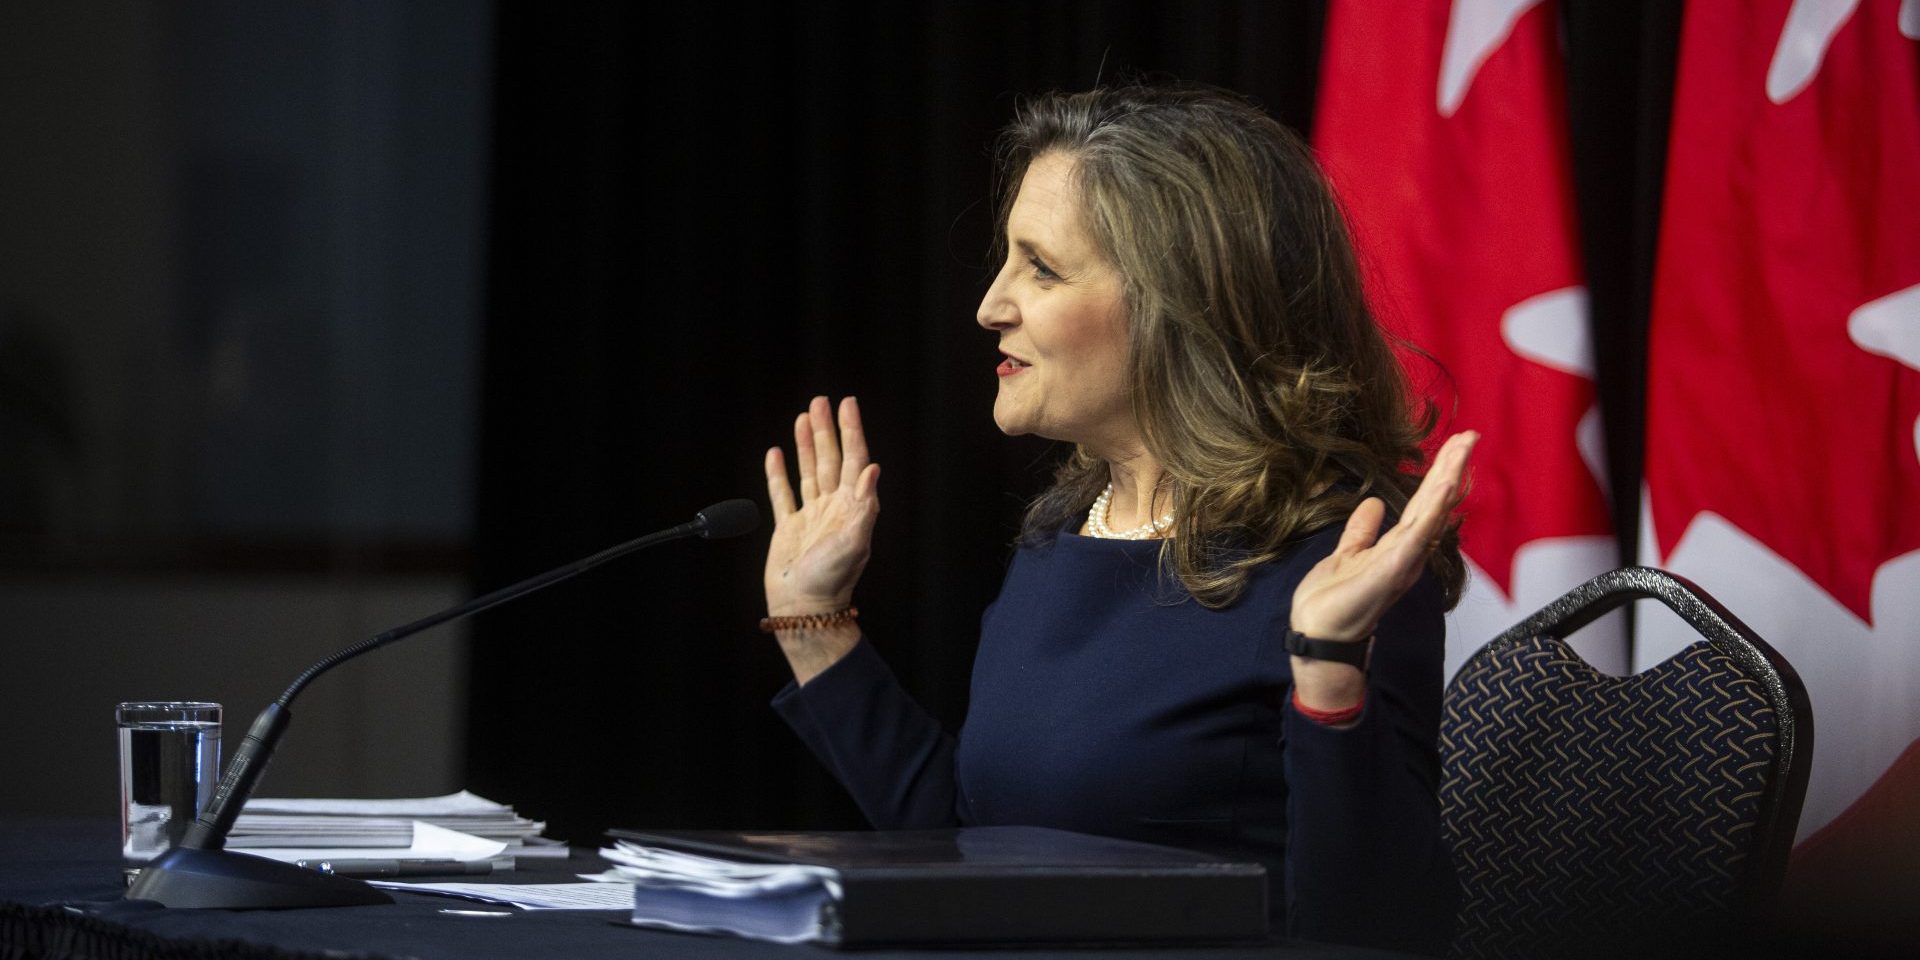 In the government’s latest budget tabled on April 16, Deputy Prime Minister and Finance Minister Chrystia Freeland had limited new commitments for Canada’s foreign ministry. The Hill Times photograph by Andrew Meade